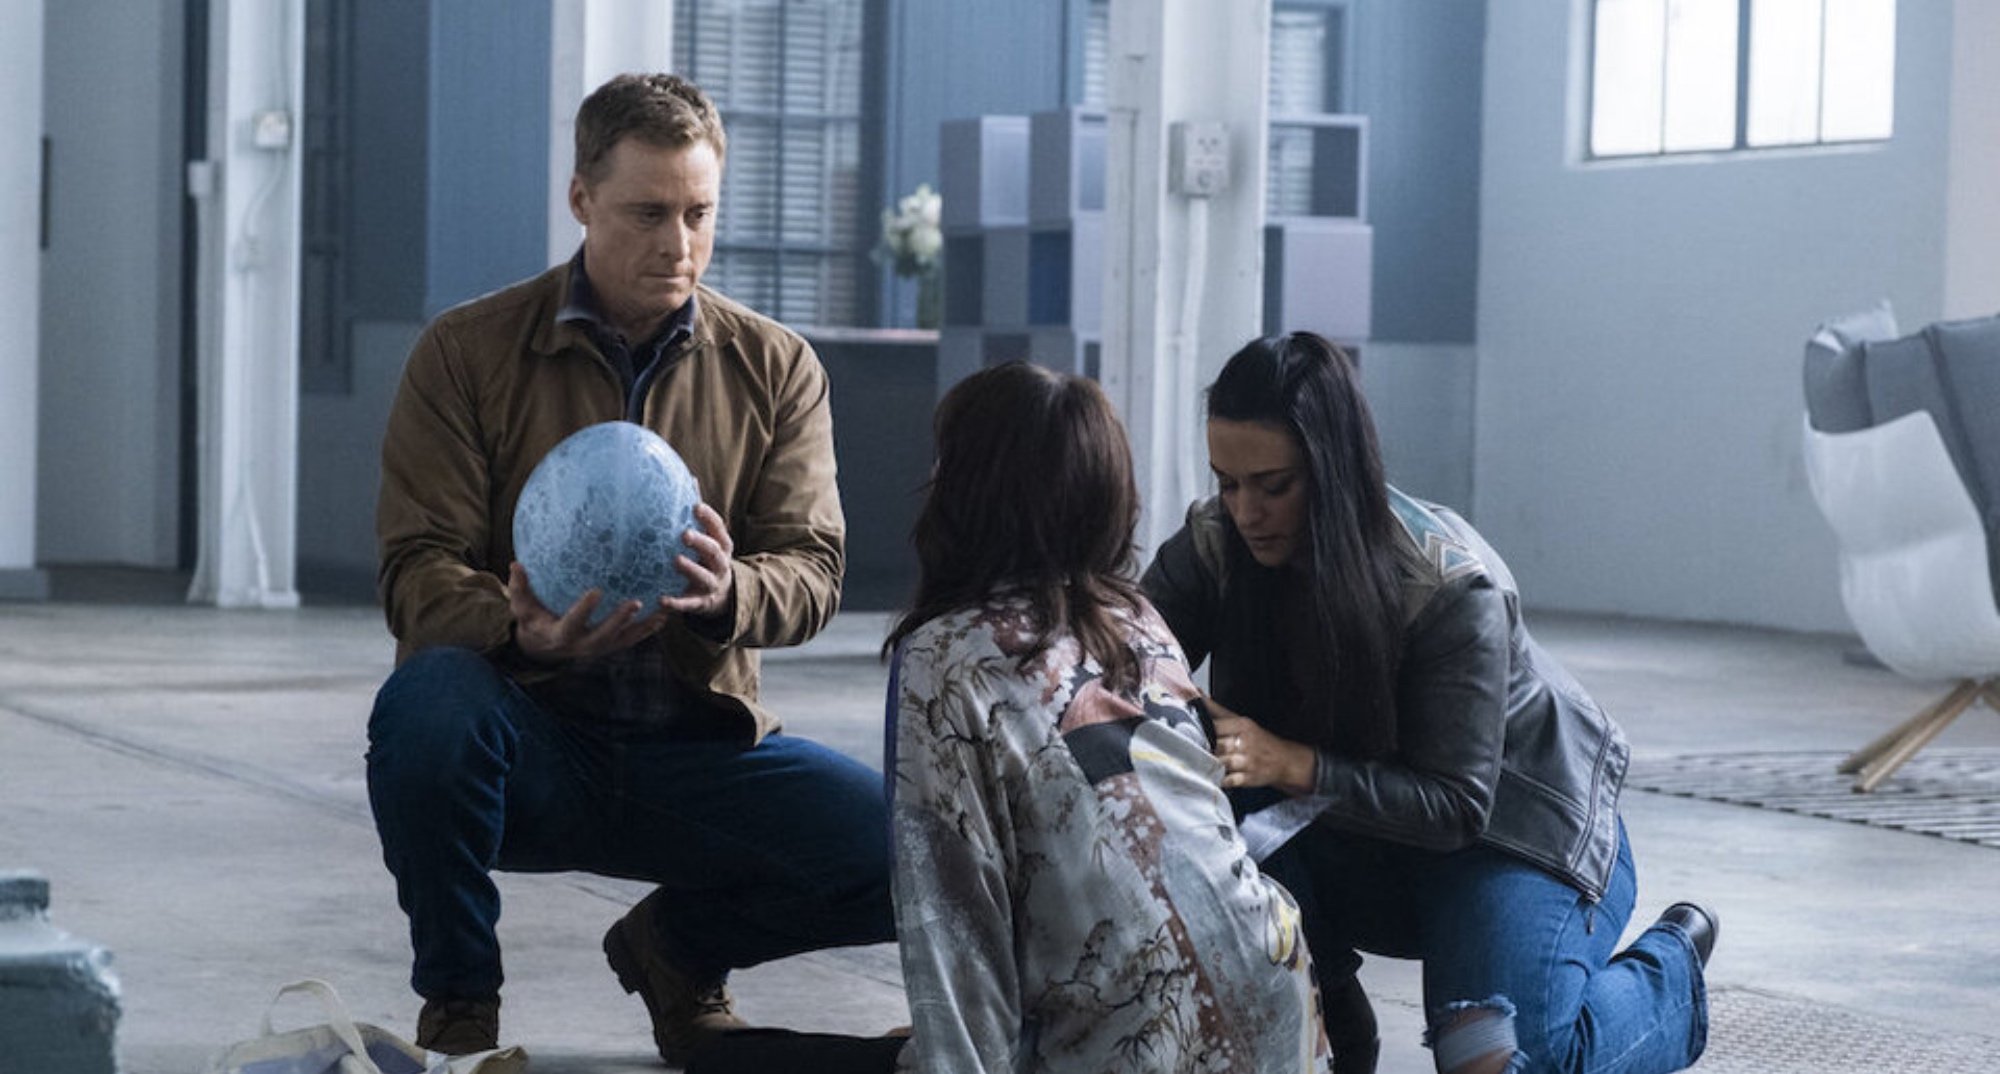 Harry, Asta and Violinda in 'Resident Alien' Season 2 with alien egg in relation to mid-season finale.